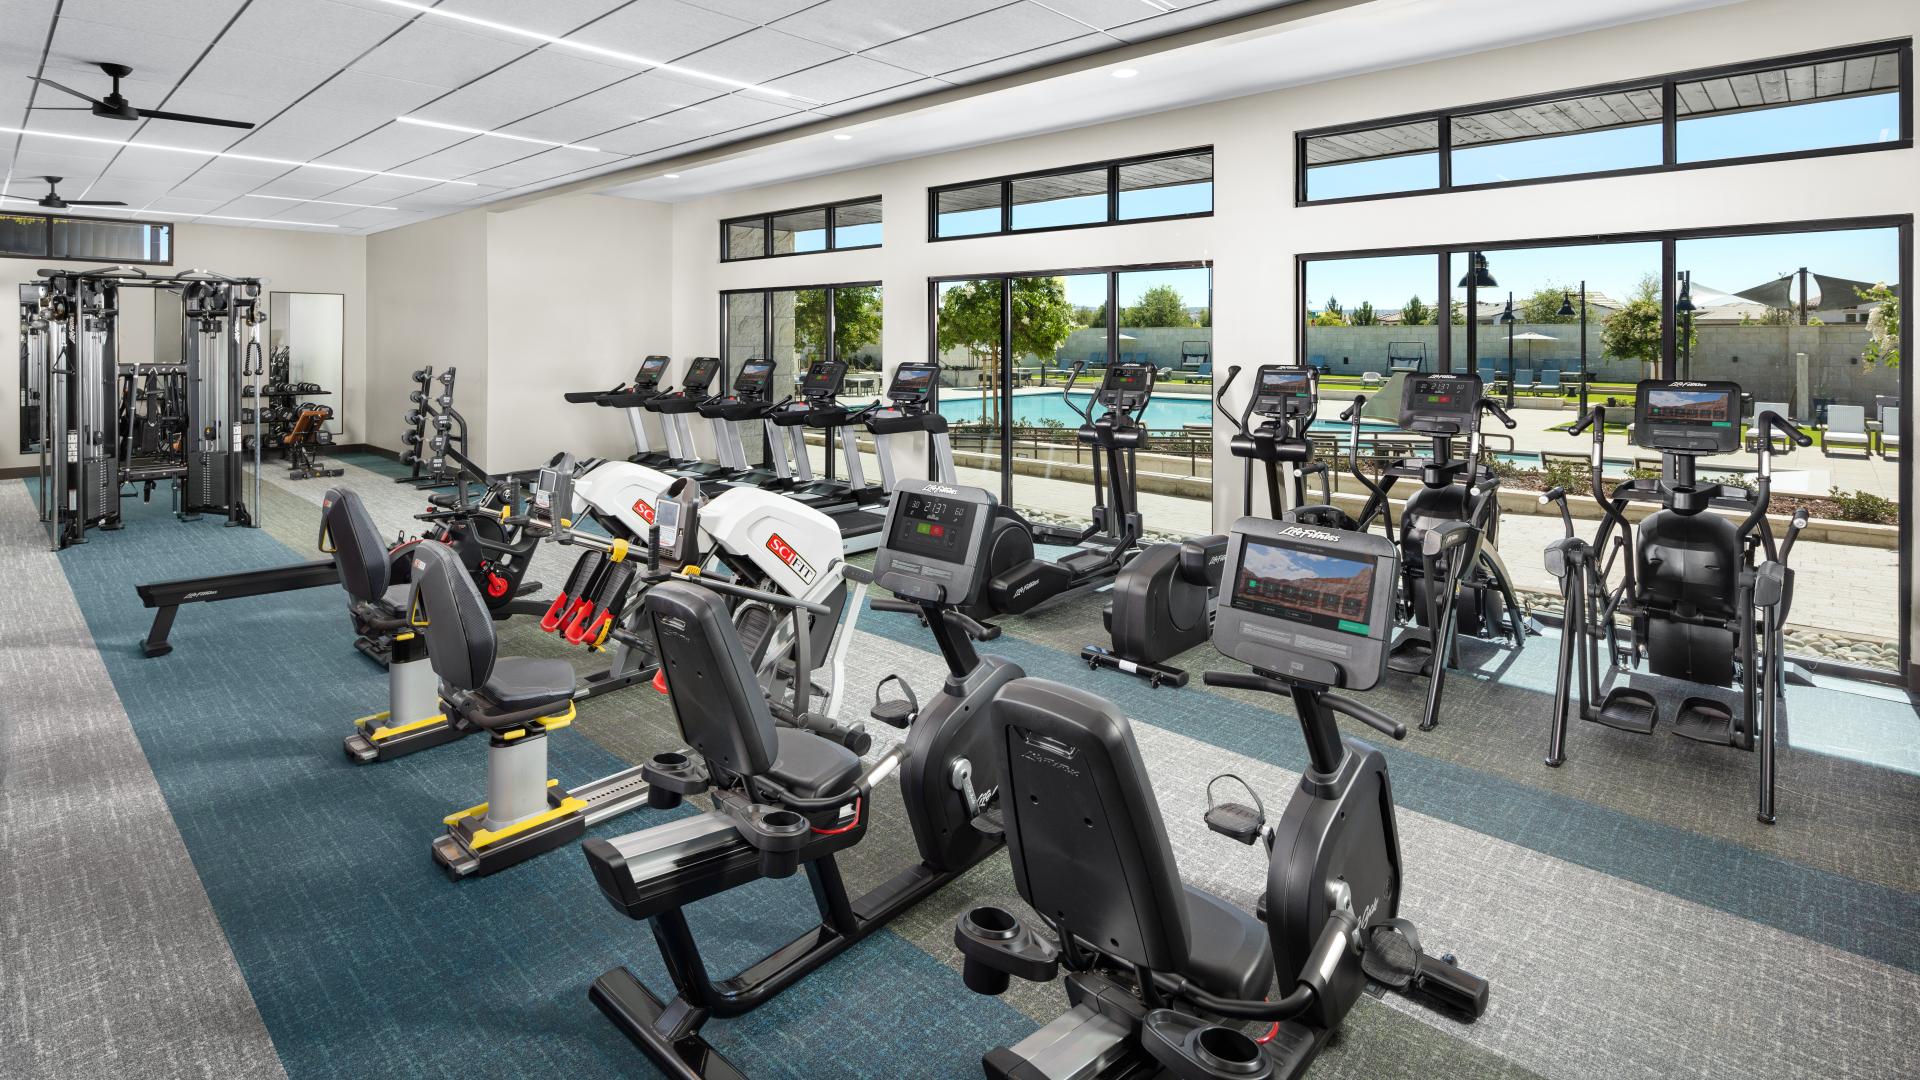 Workout in the state-of-the-art fitness center